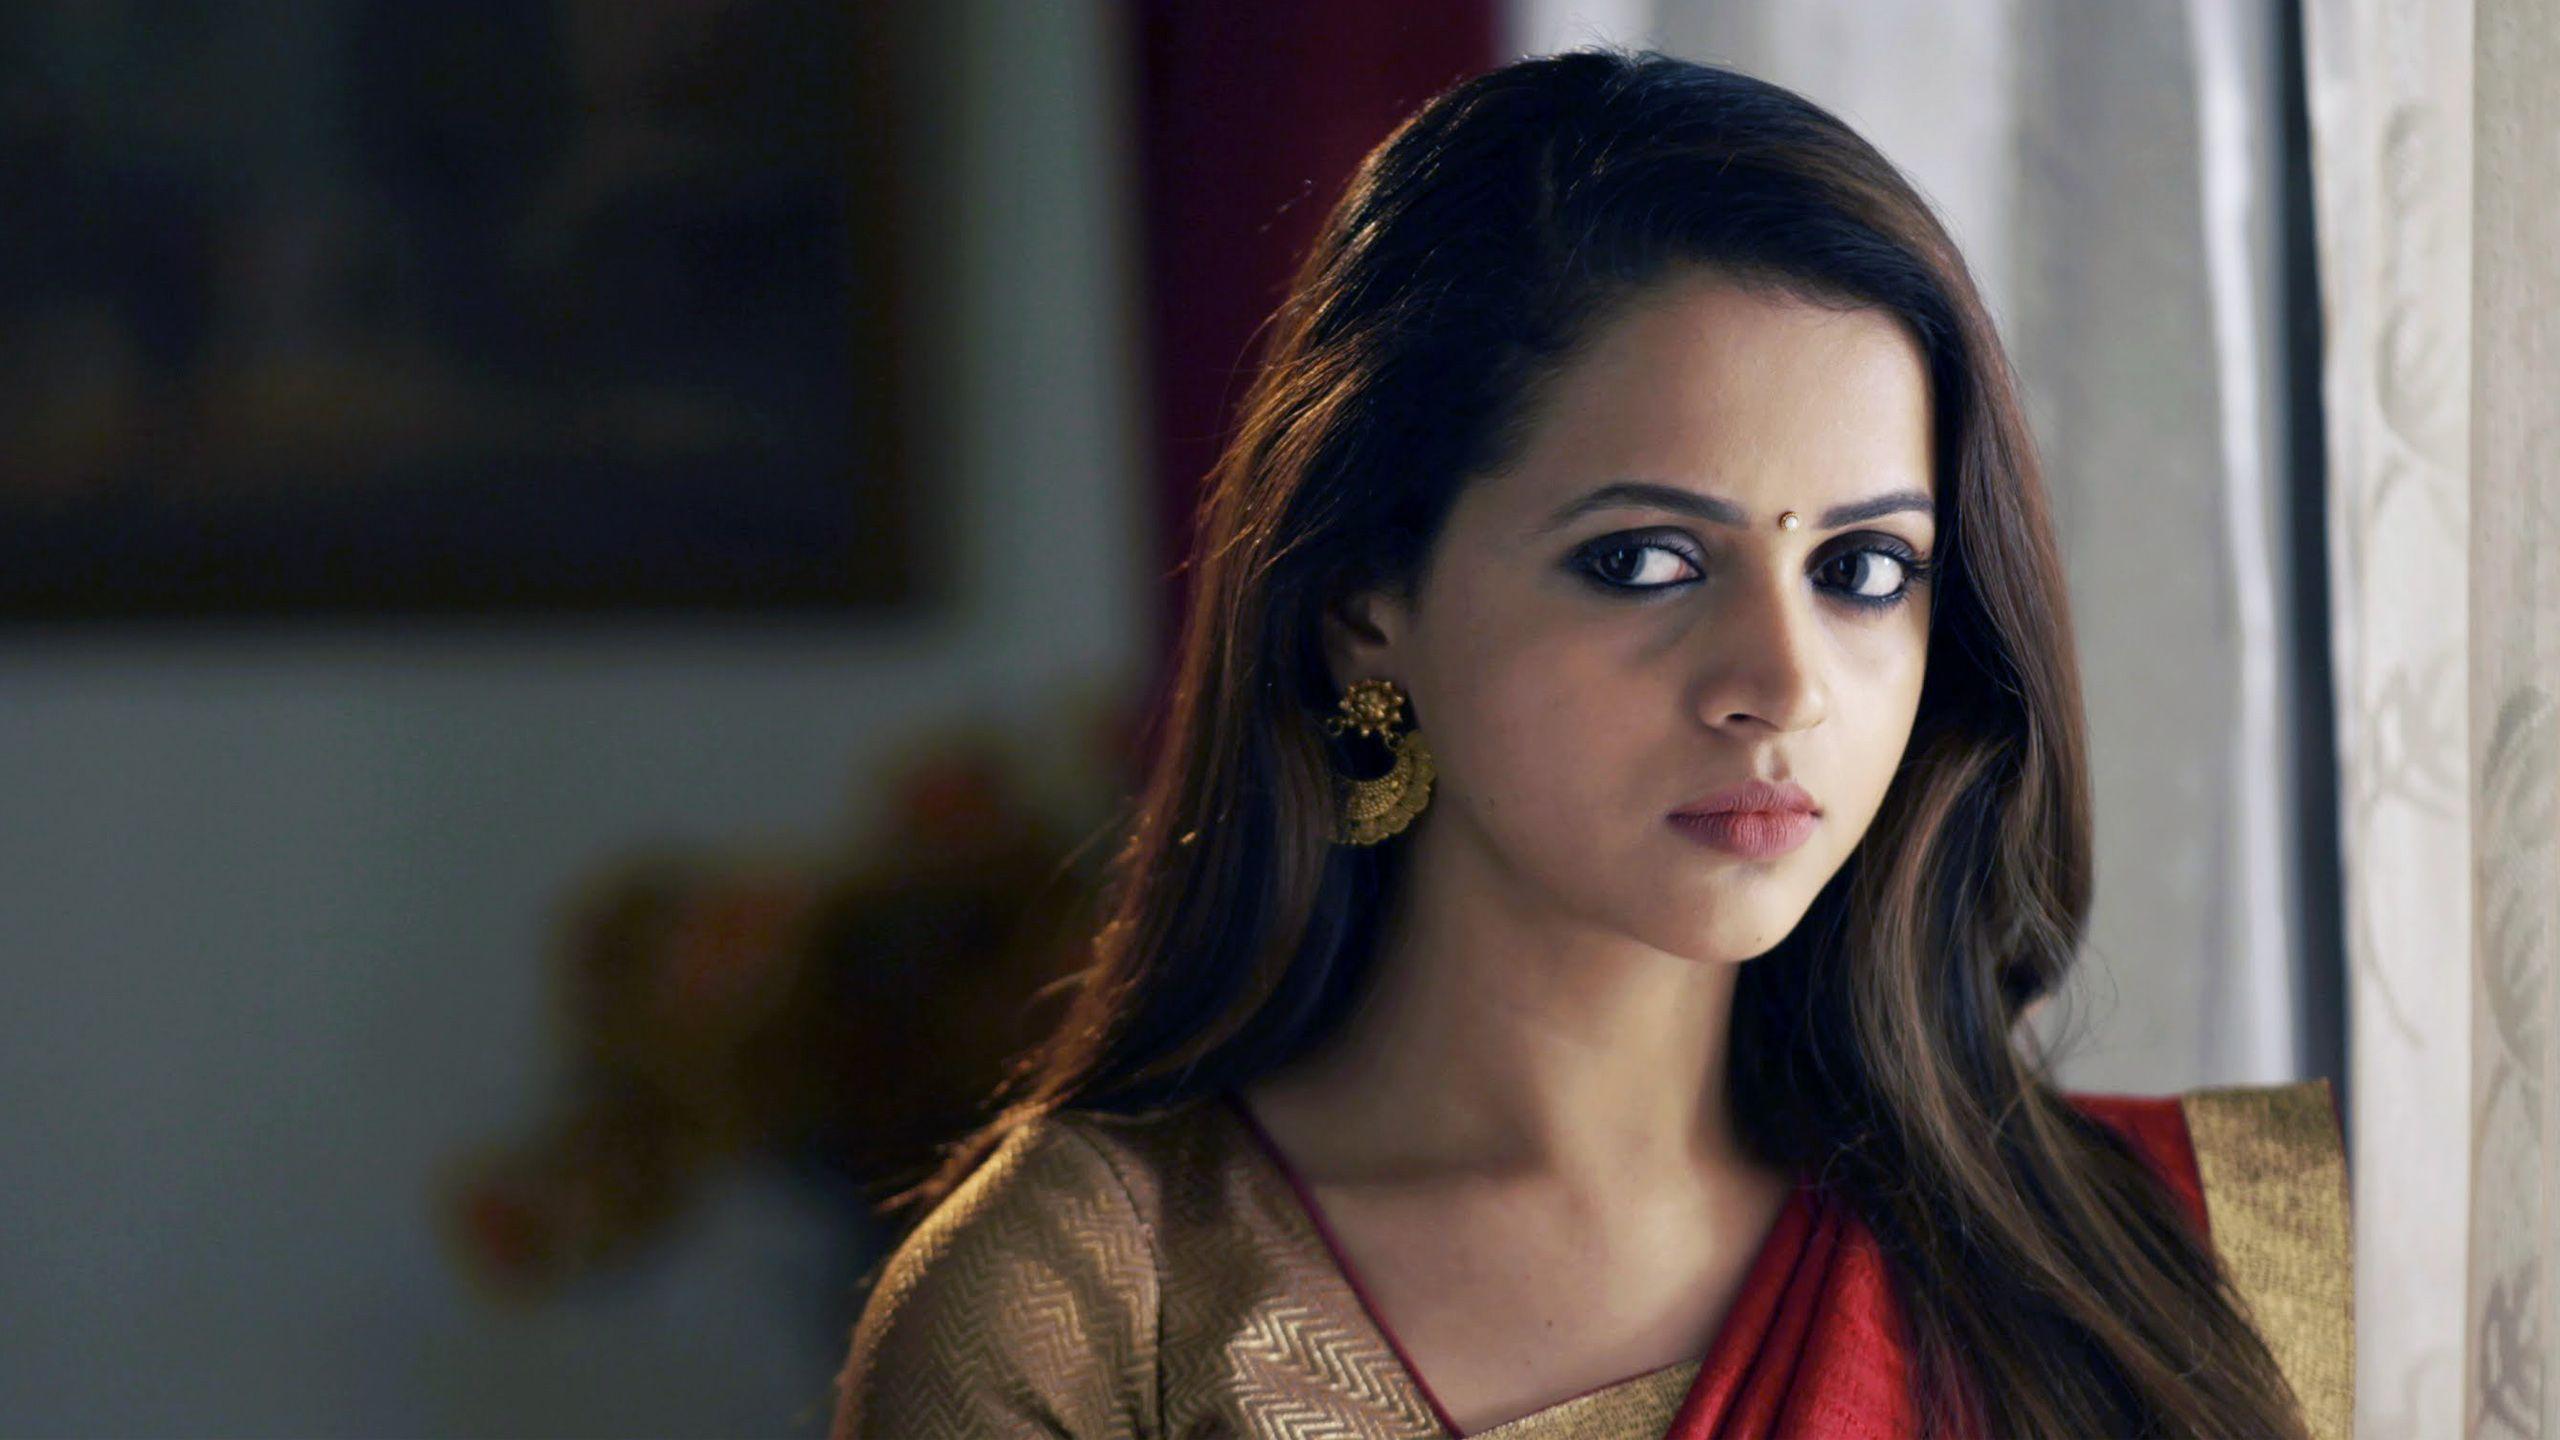 South Indian Actress Bhavana - Wallpapers | DesiComments.com